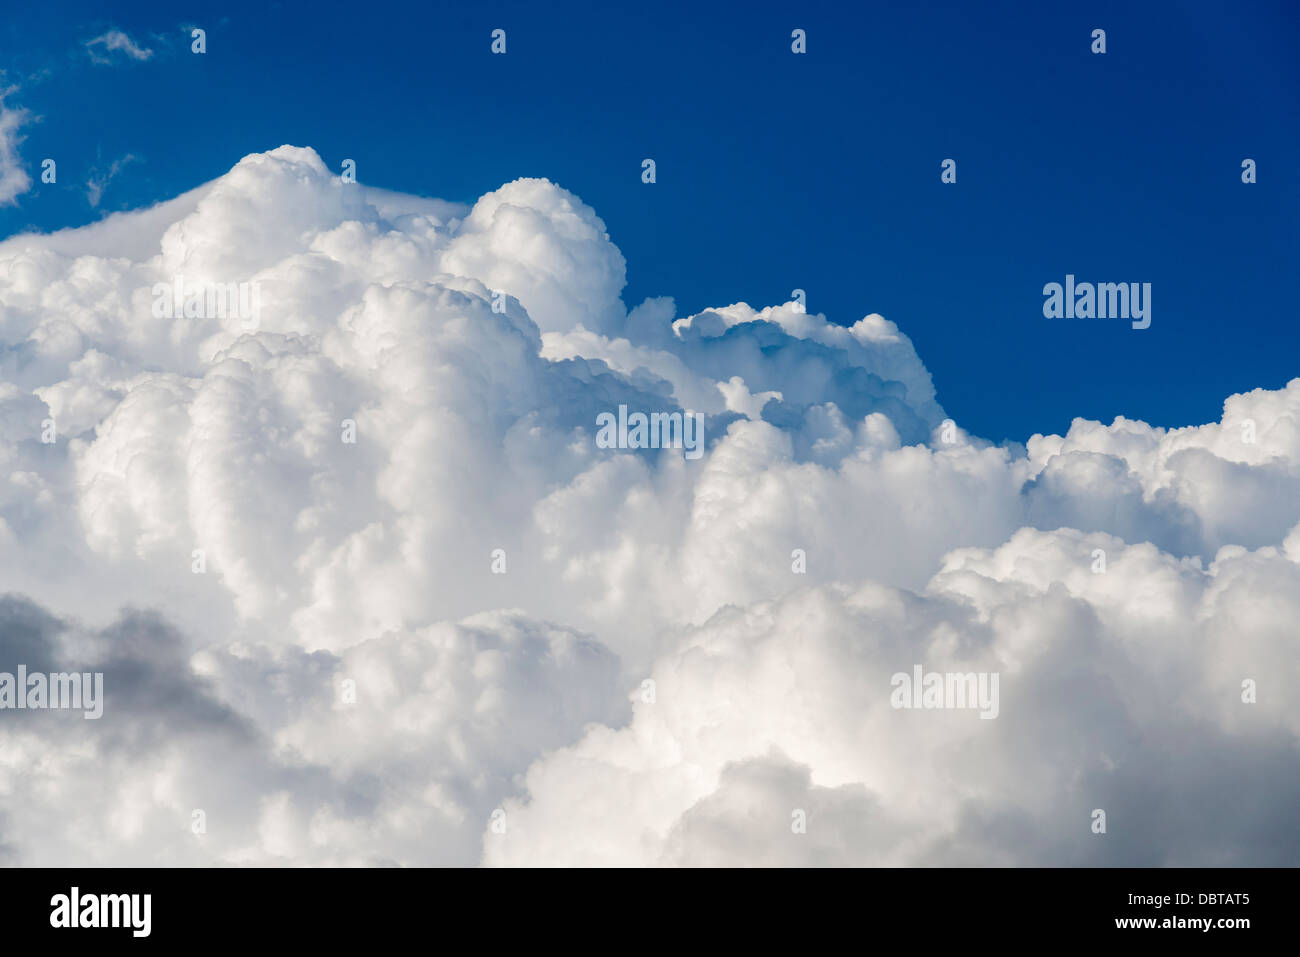 Fluffy white clouds with a deep blue sky. Stock Photo